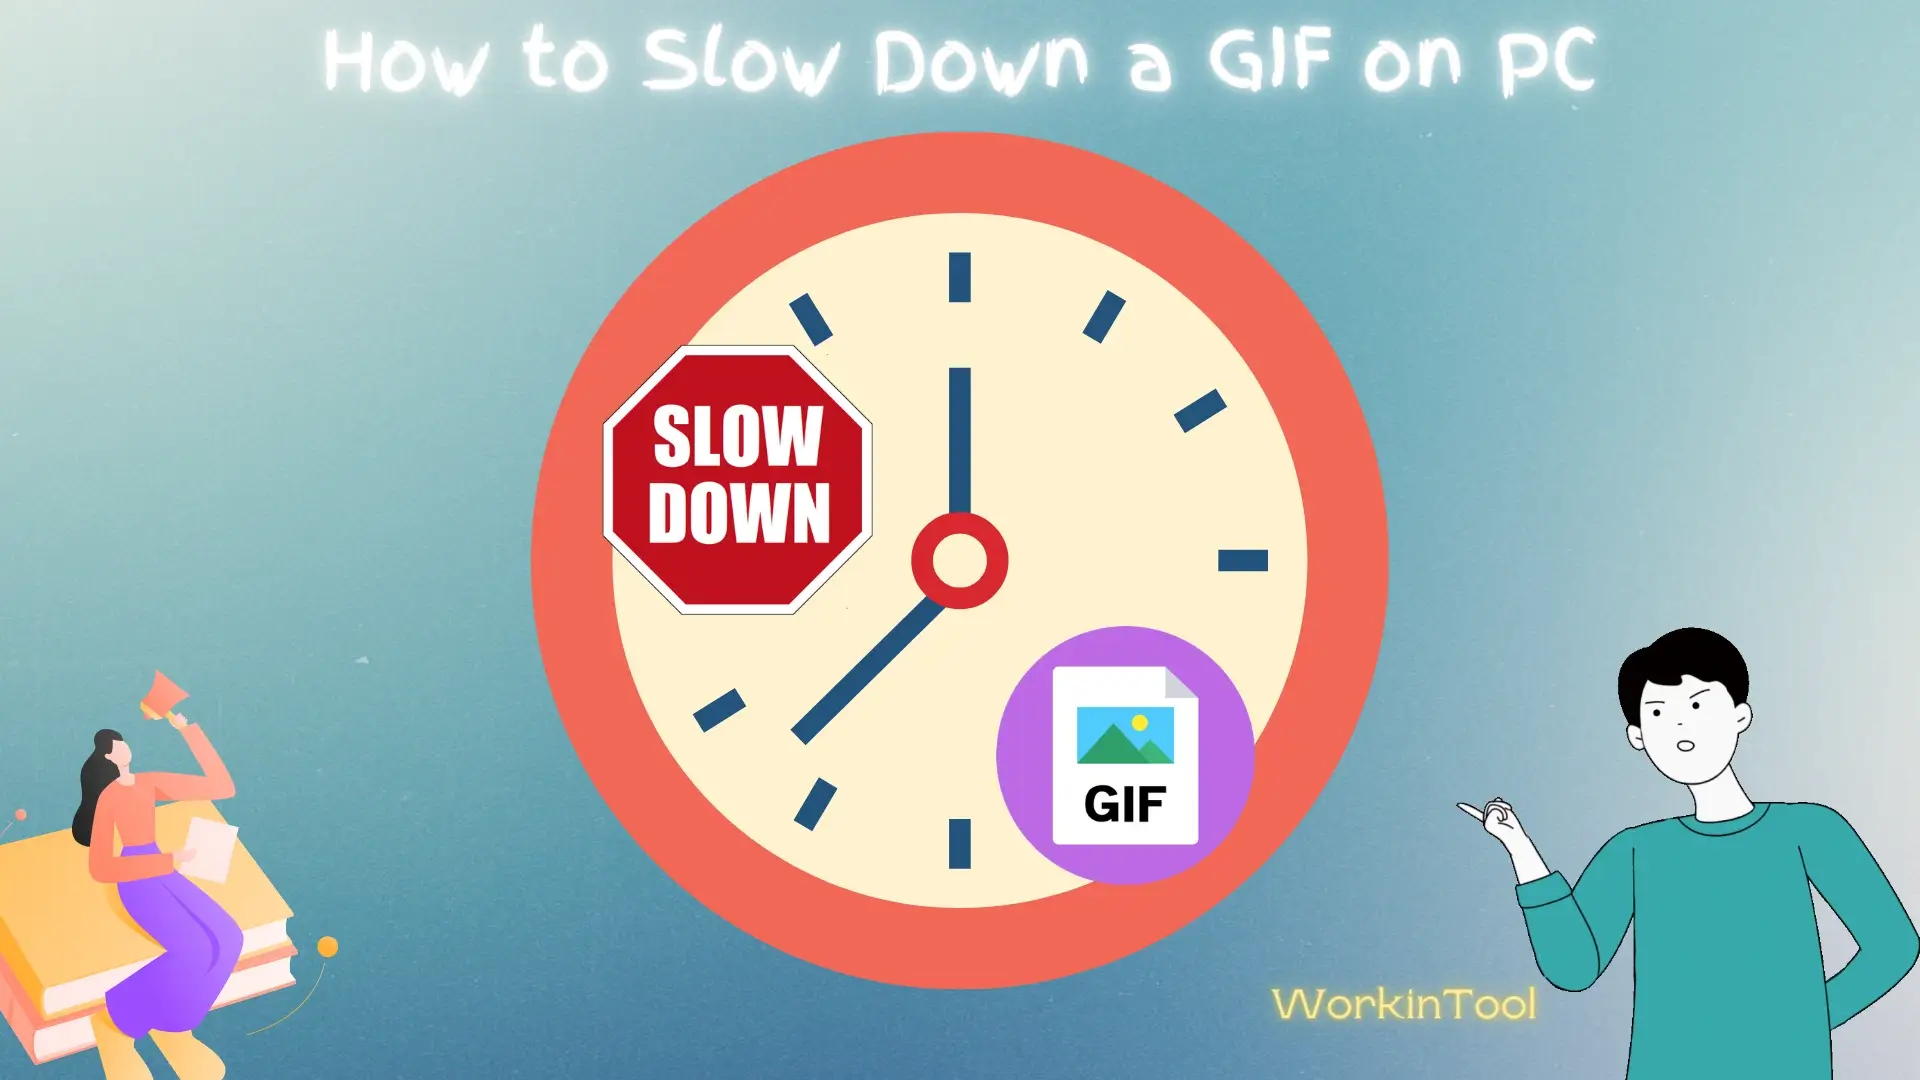 How to create an animated GIF meme in Windows 11/10